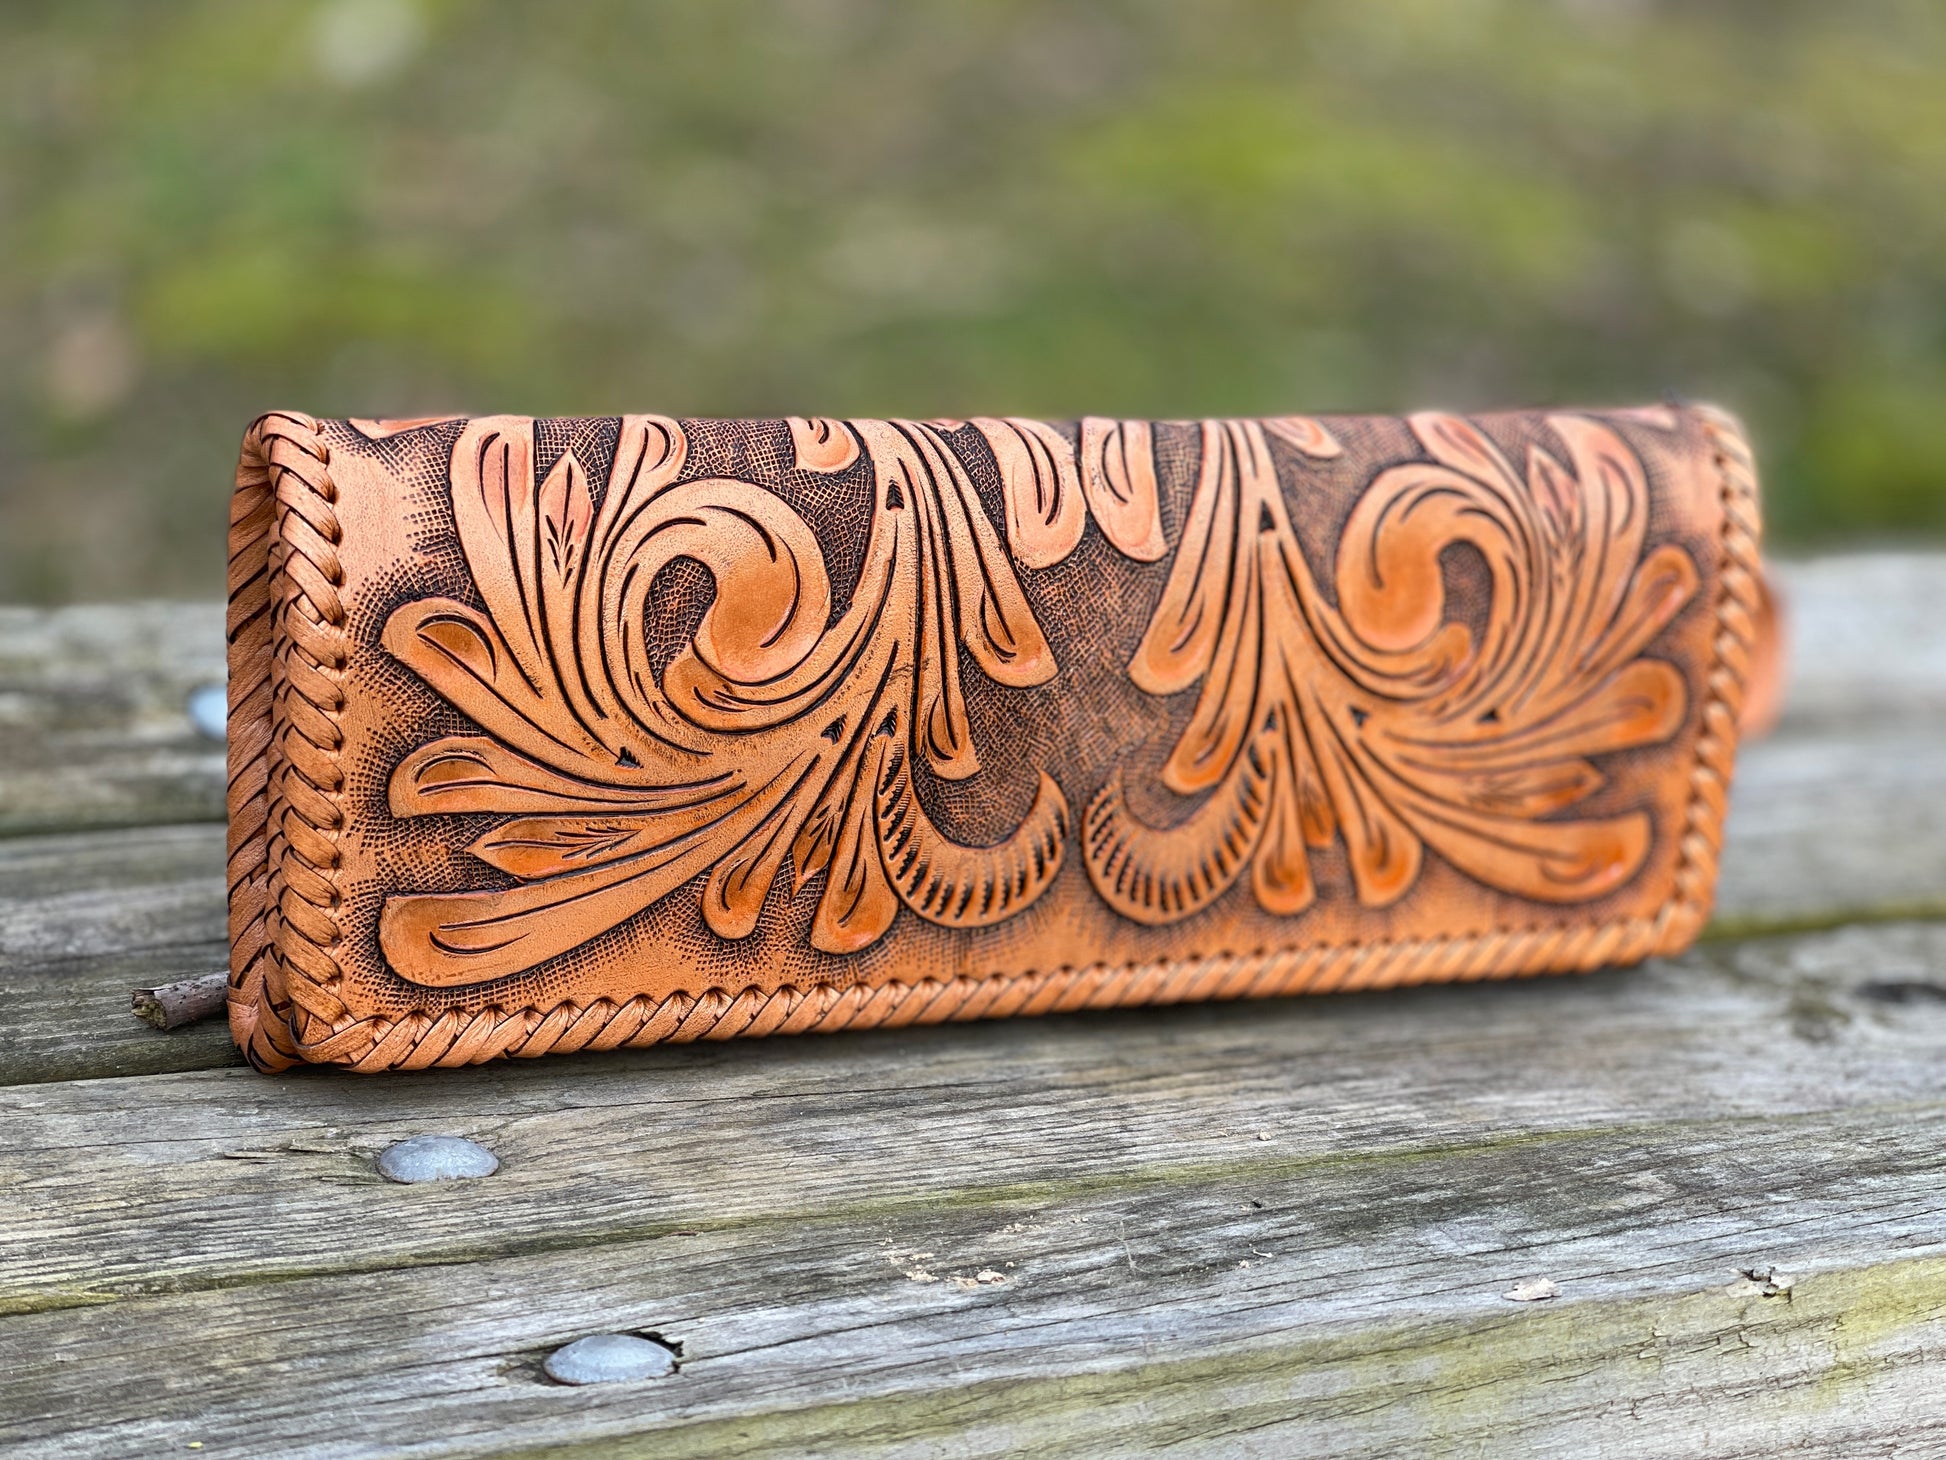 Hand Tooled Leather Clutch - Wristlet "Oaxaca" by ALLE, Vintage Boho style - ALLE Handbags